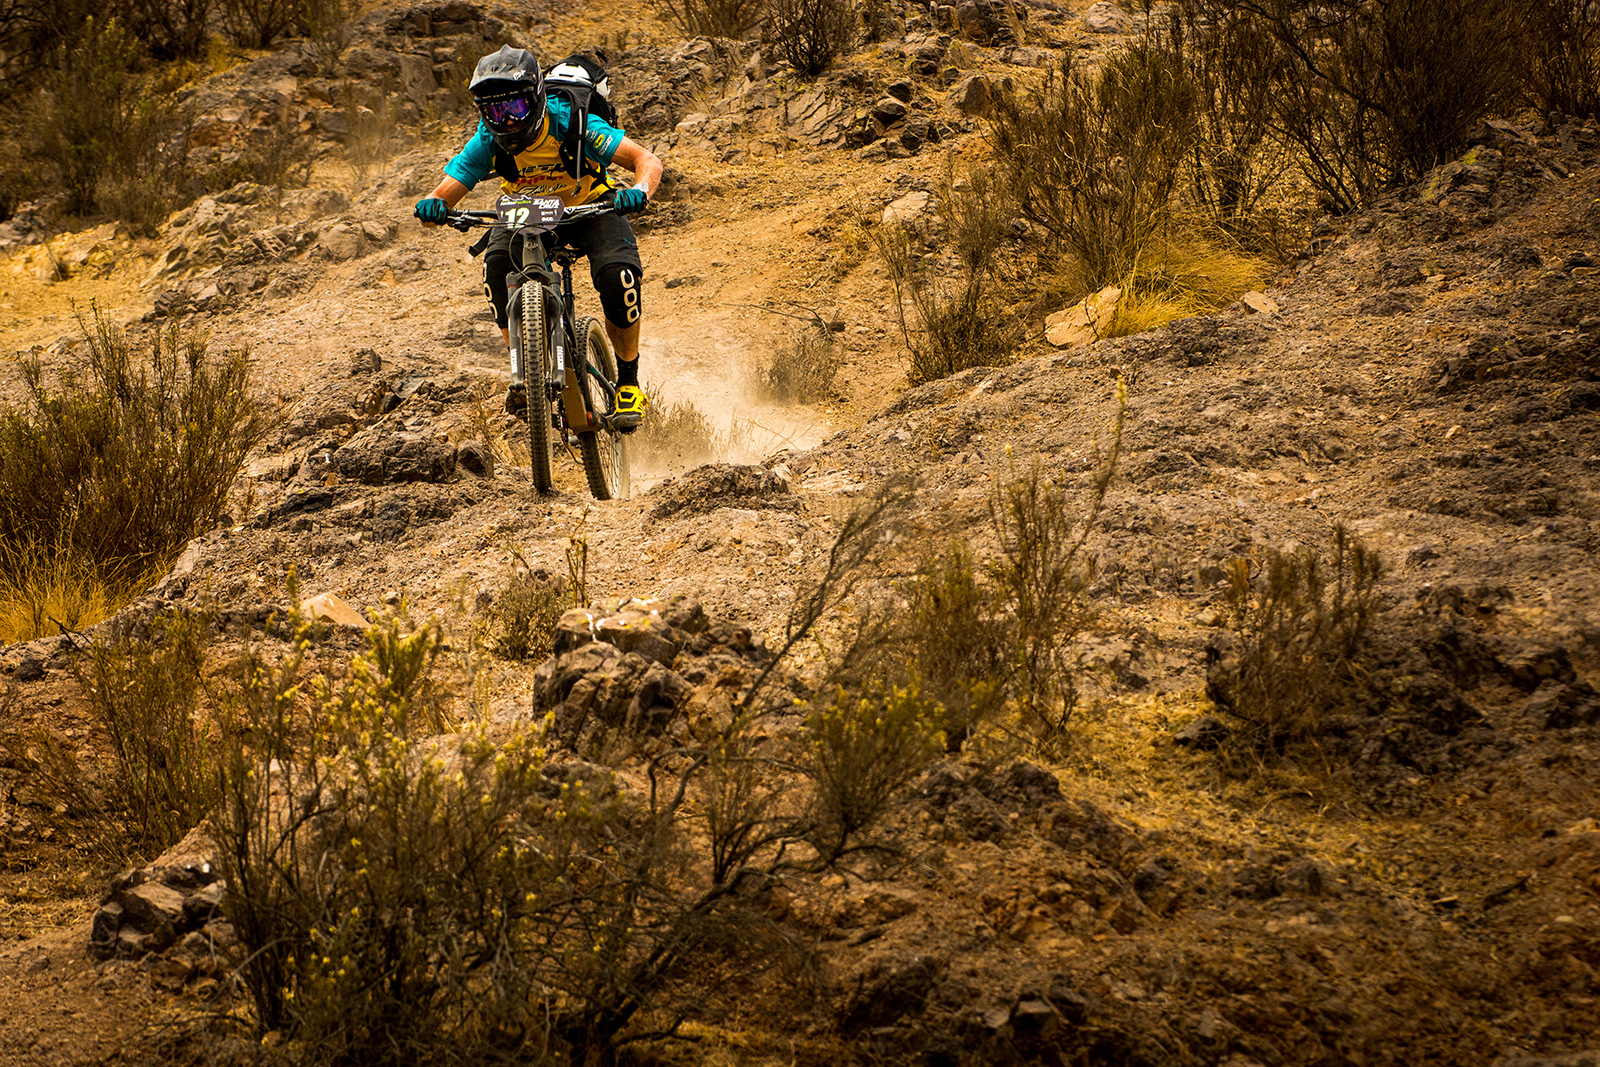 Nate hammering it home on day four of a very challenging Andes Pacifico race.